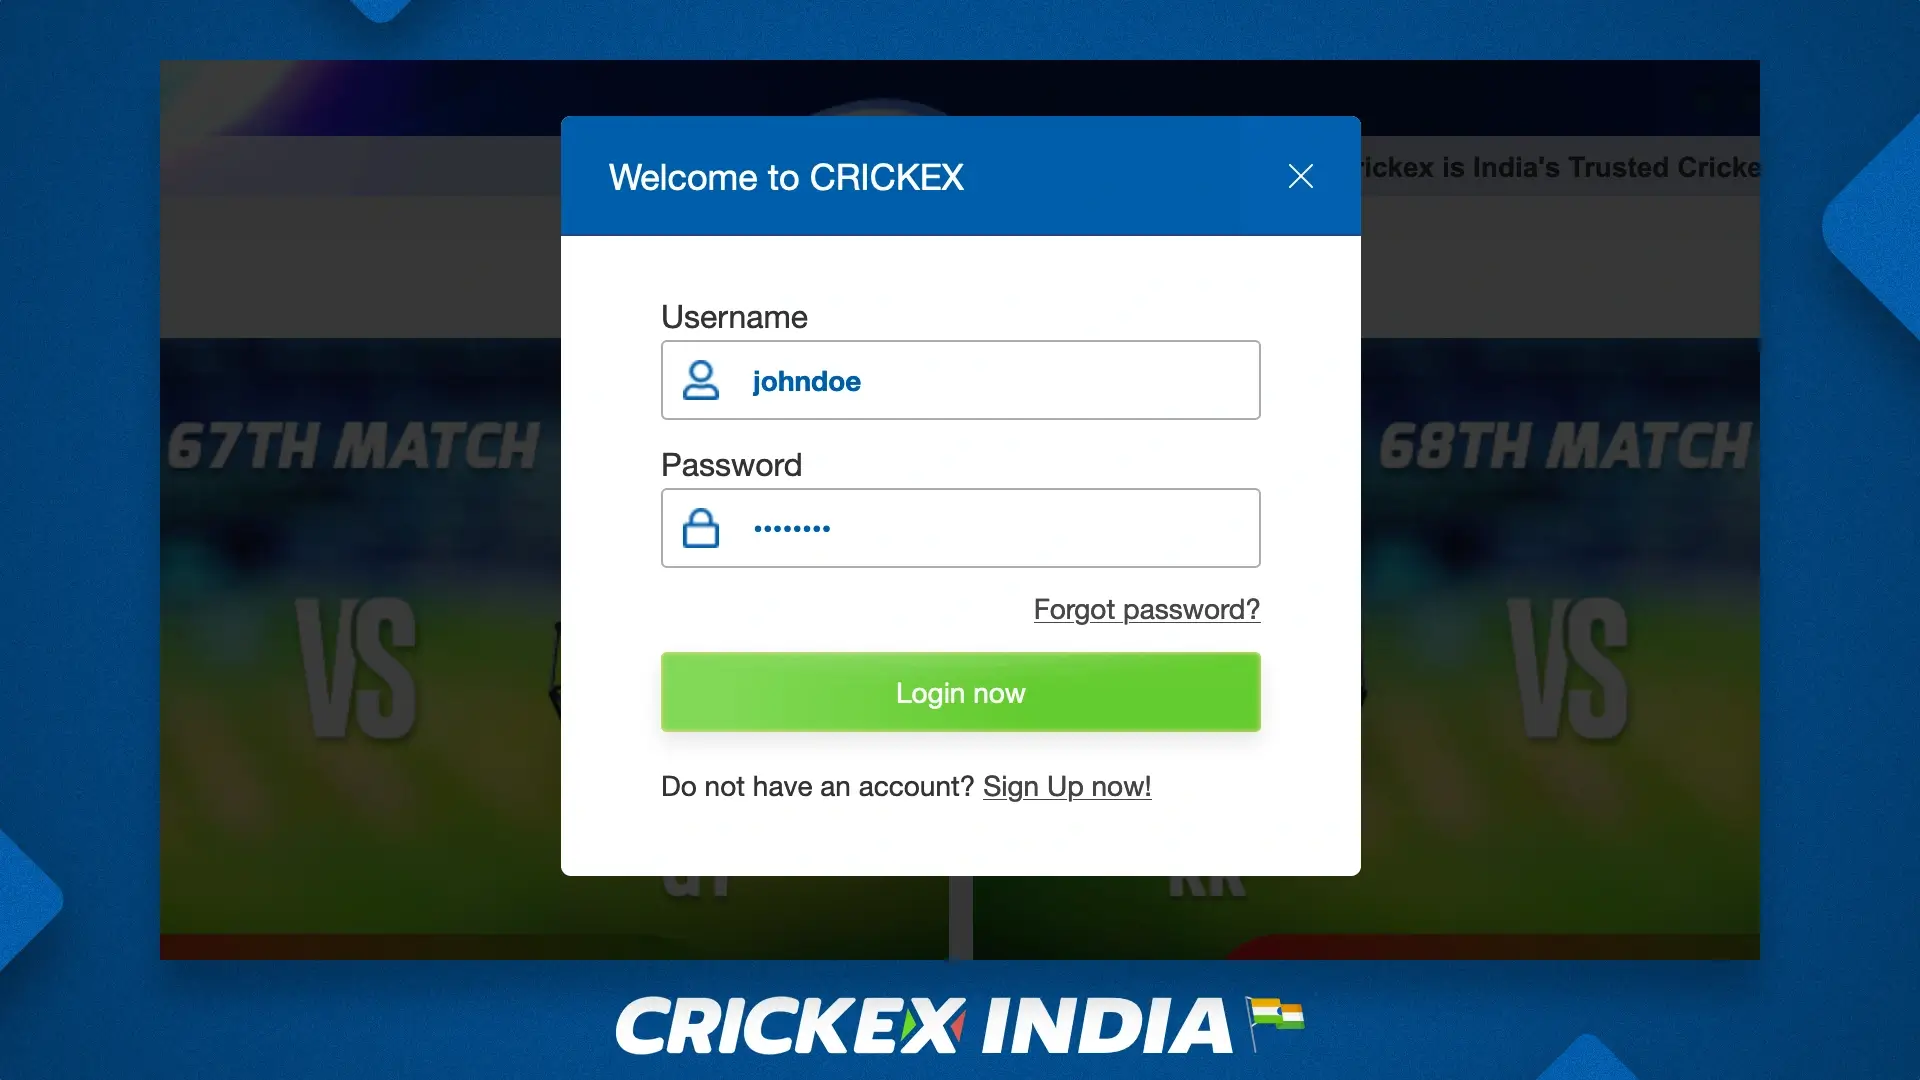 Authorize client on the official Crickex website